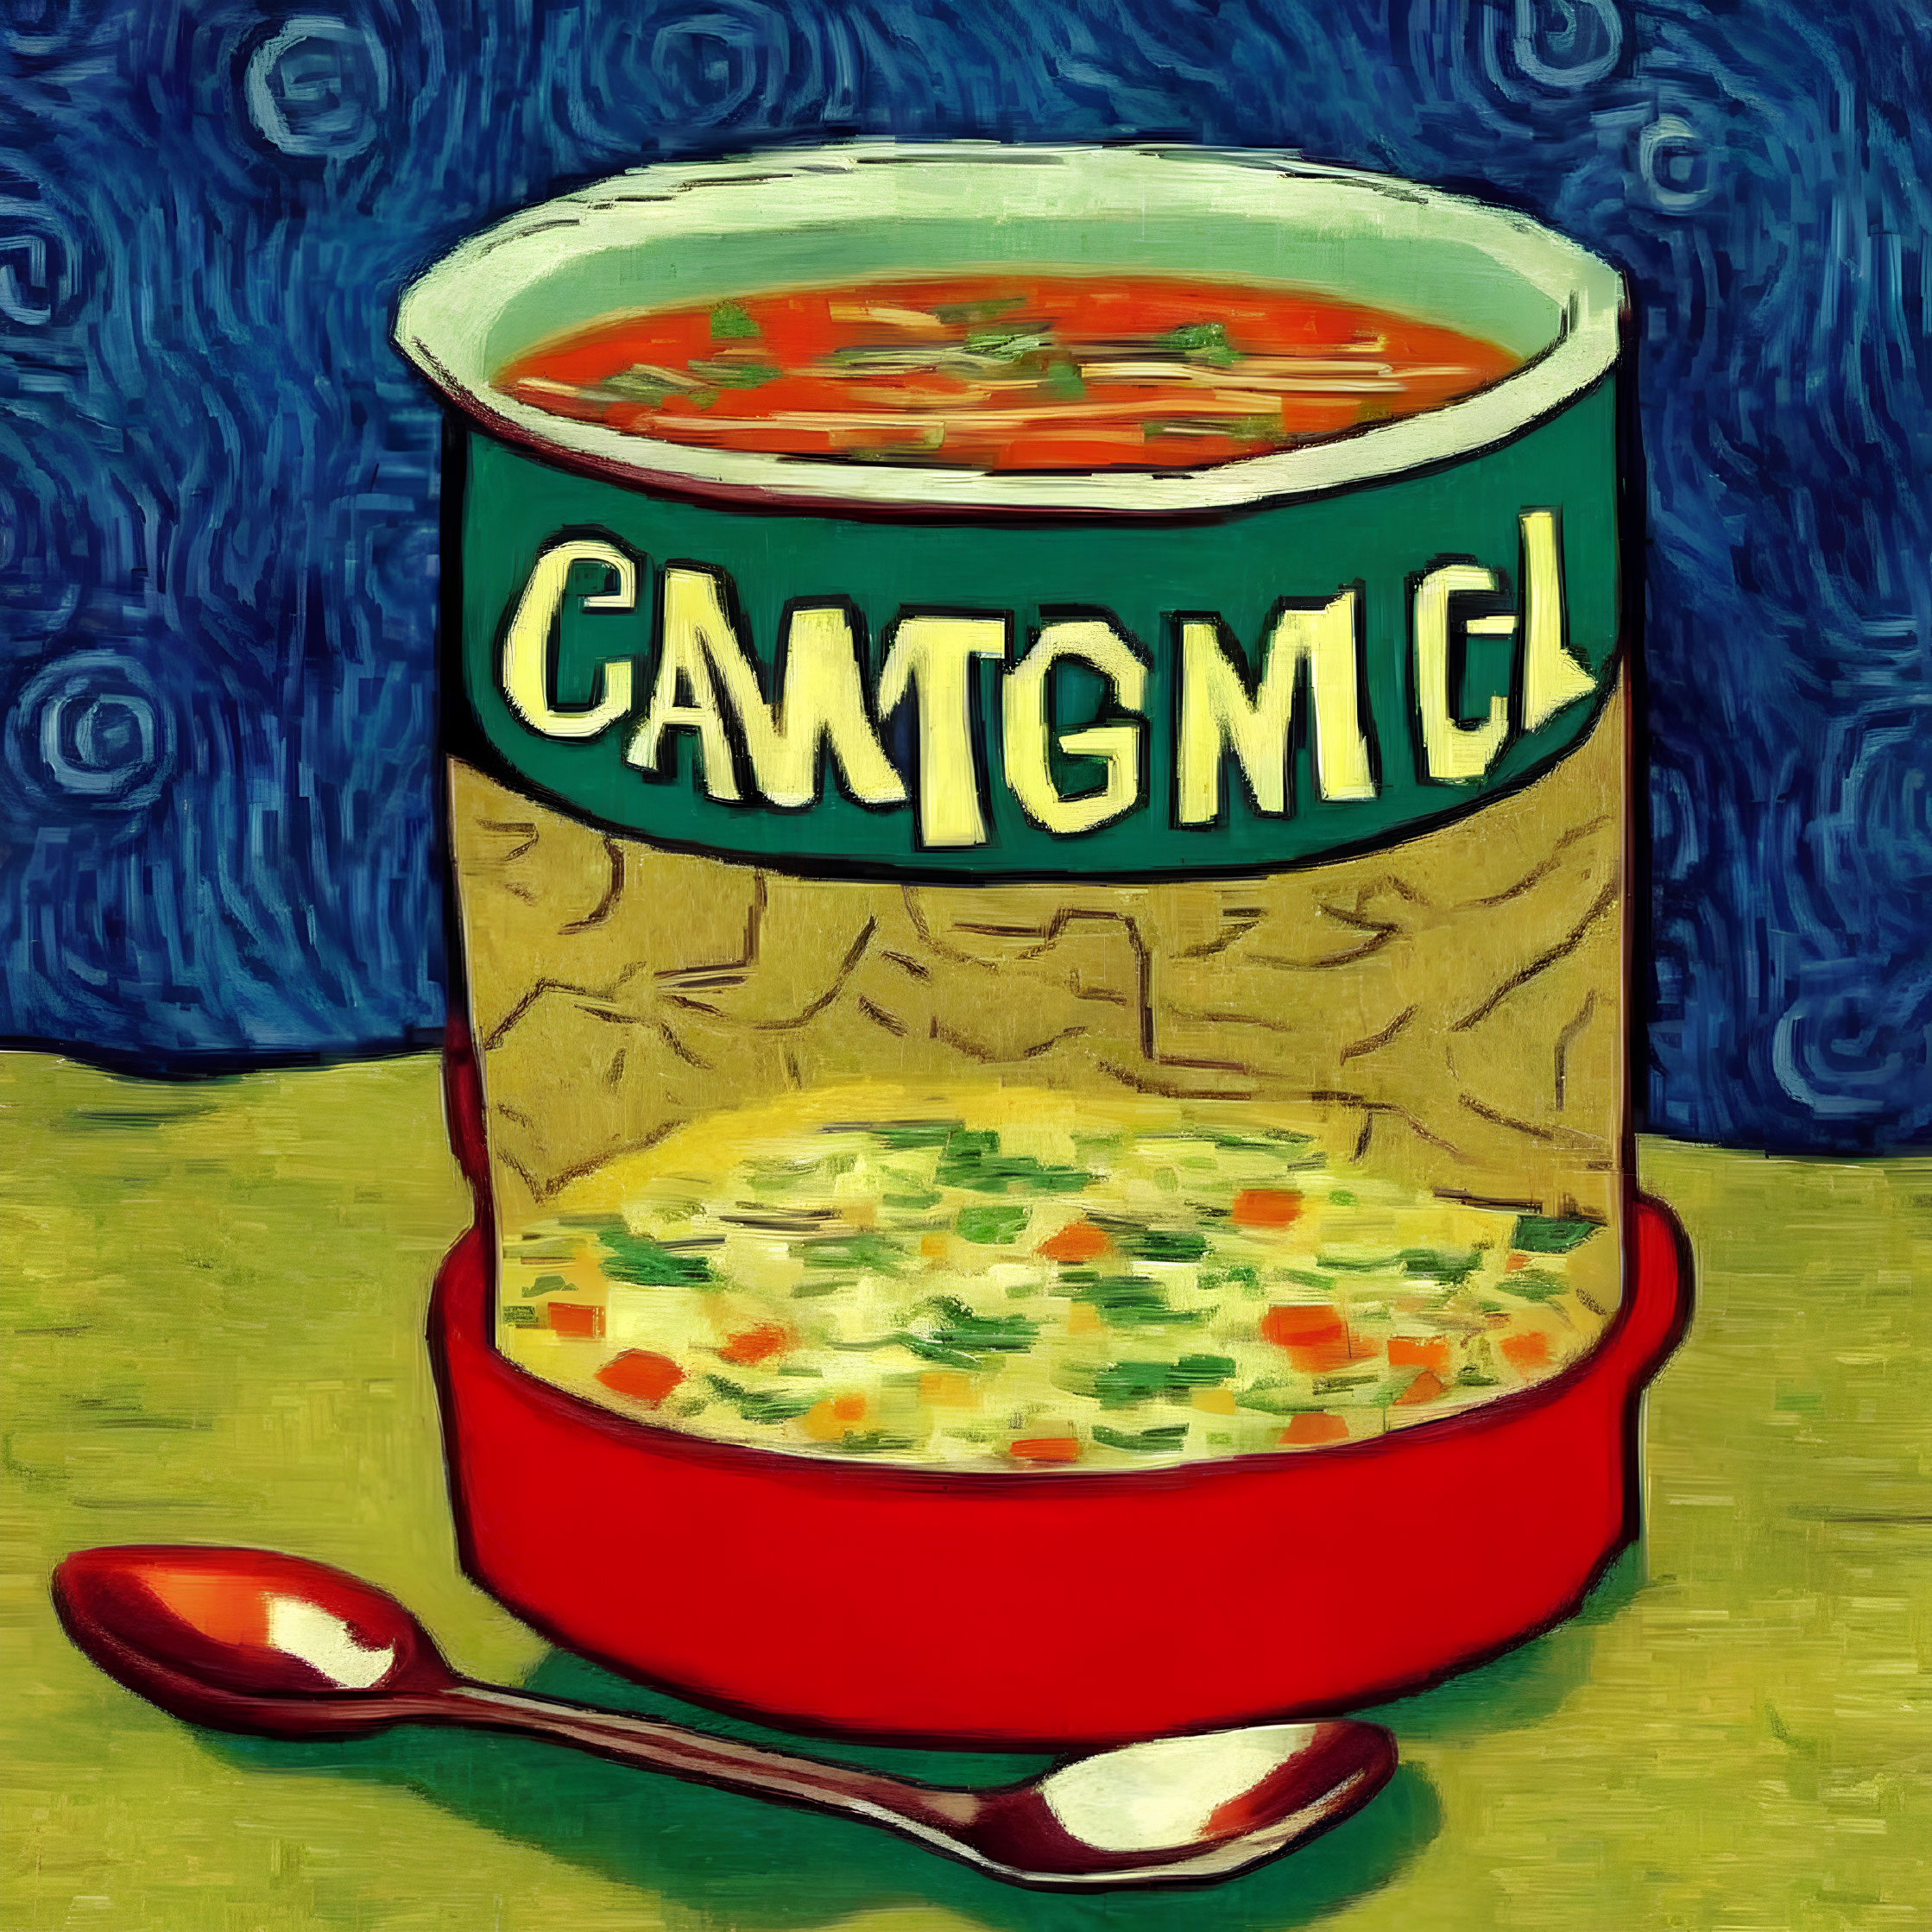 Stylized soup can with "CAMTMCL" label on blue background, spoon, and open